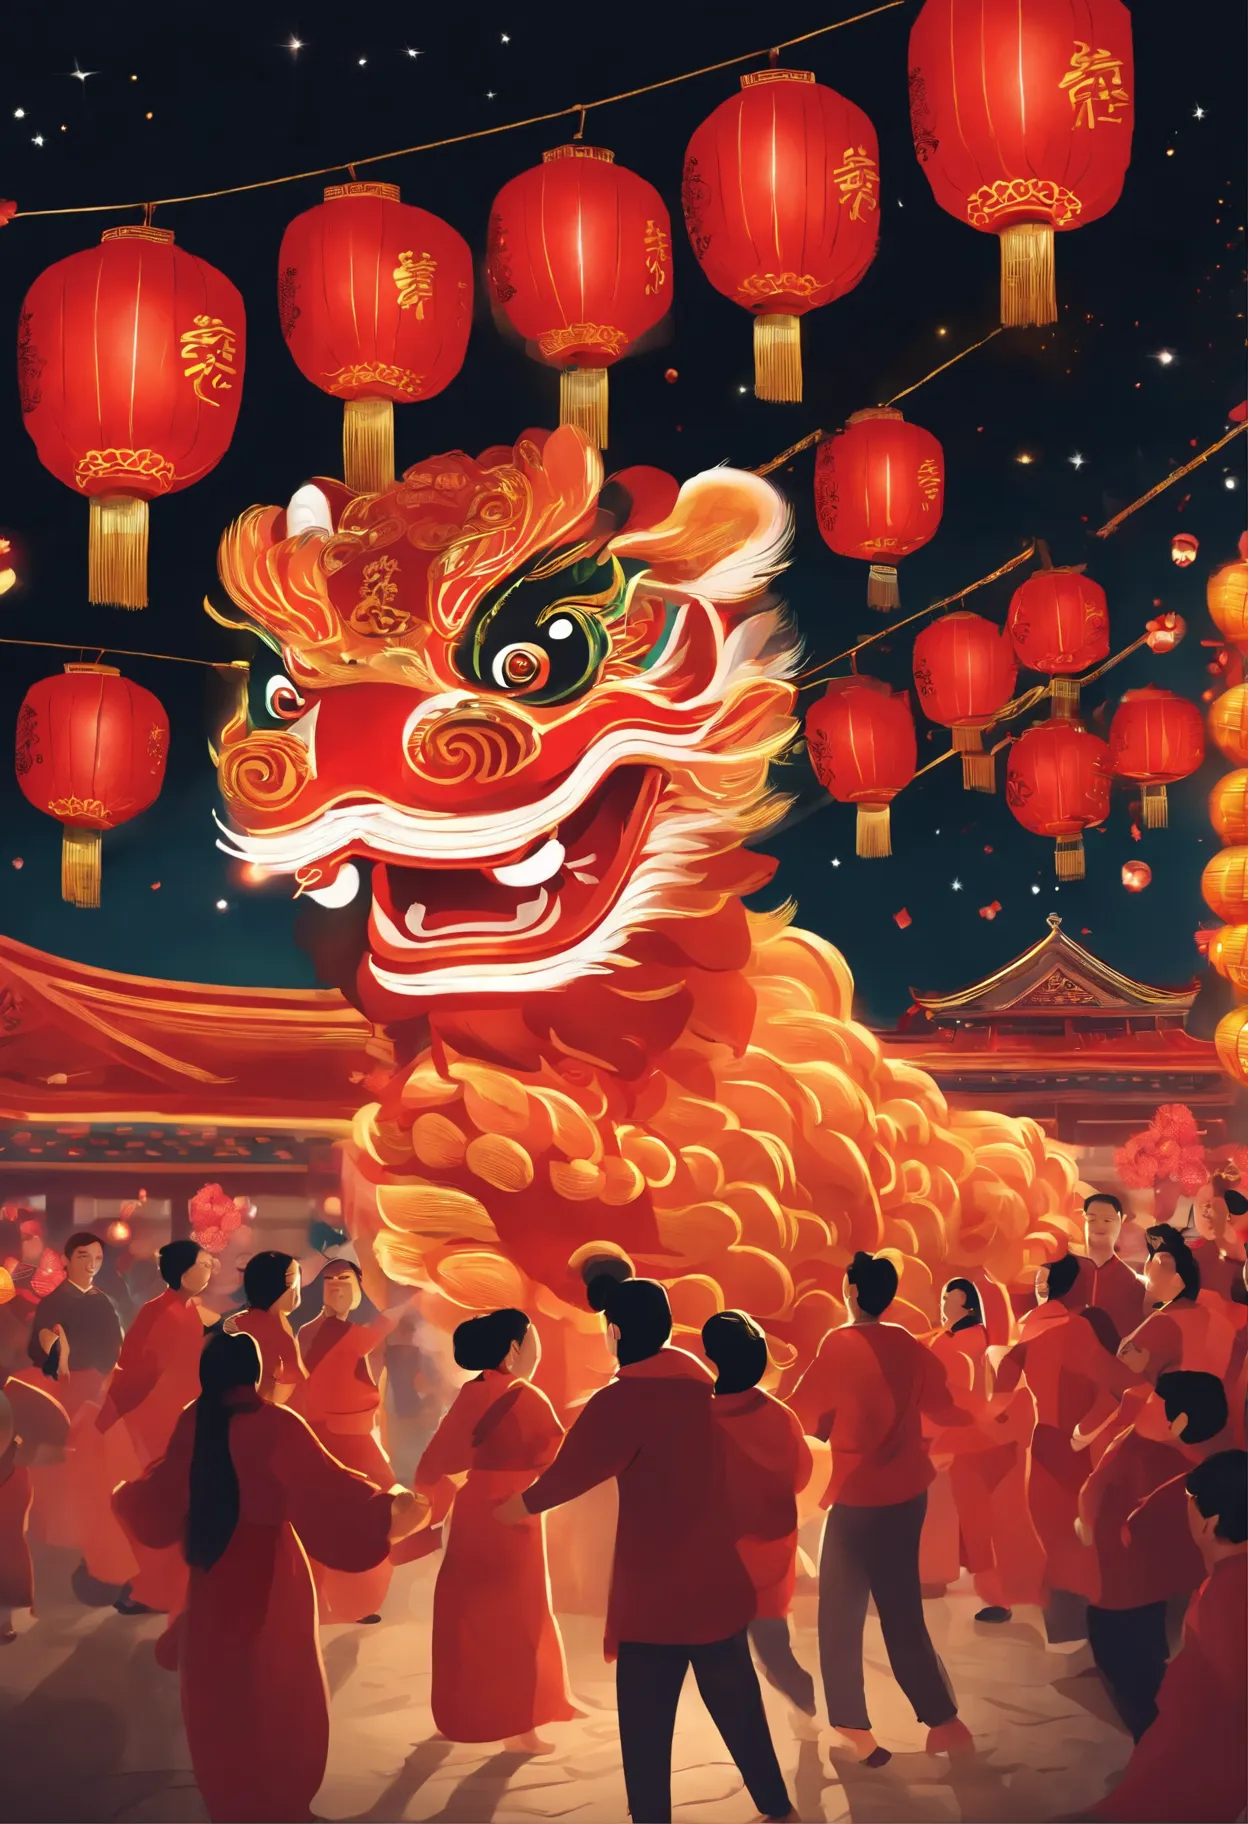 “Create an AI drawing depicting joyful scenes of lion dancers, lanterns illuminating the night sky, and families gathering for a festive Chinese New Year celebration. Capture the vibrancy and excitement of ushering in the Year of the [current zodiac animal...